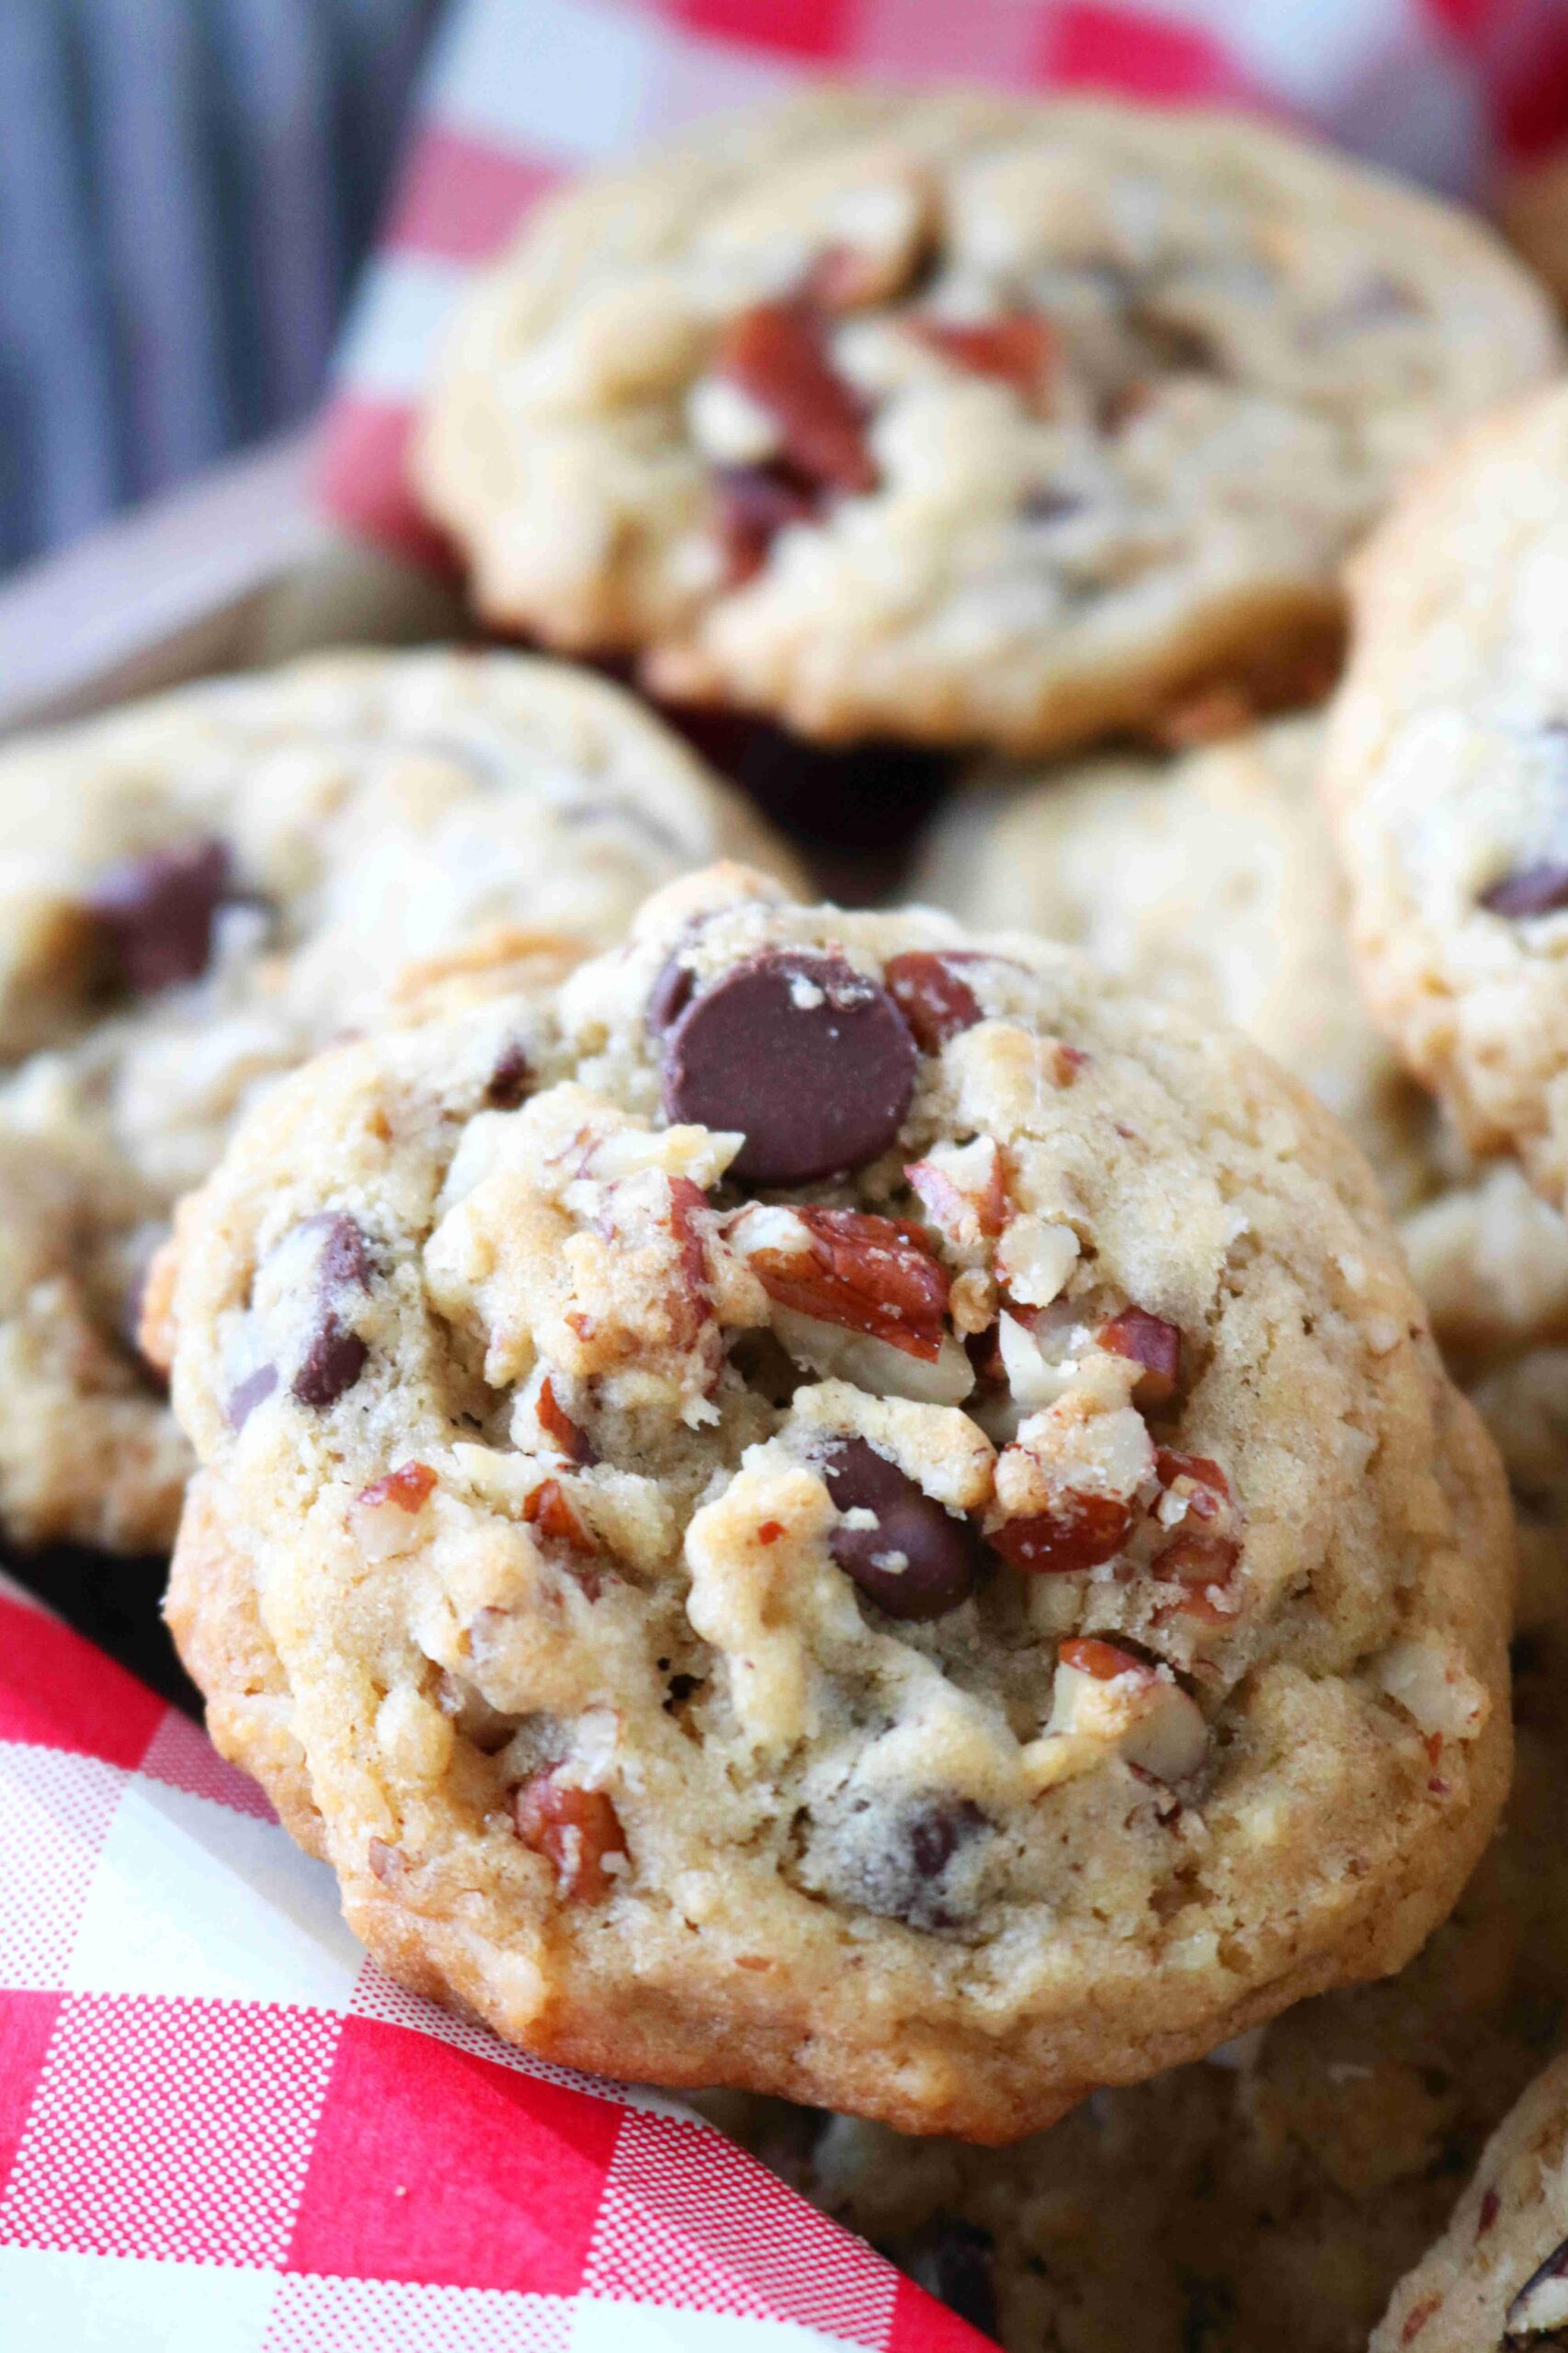  Flavored with cinnamon, oats, and pecans, and topped with some melted chocolate, these cookies are simply heavenly.